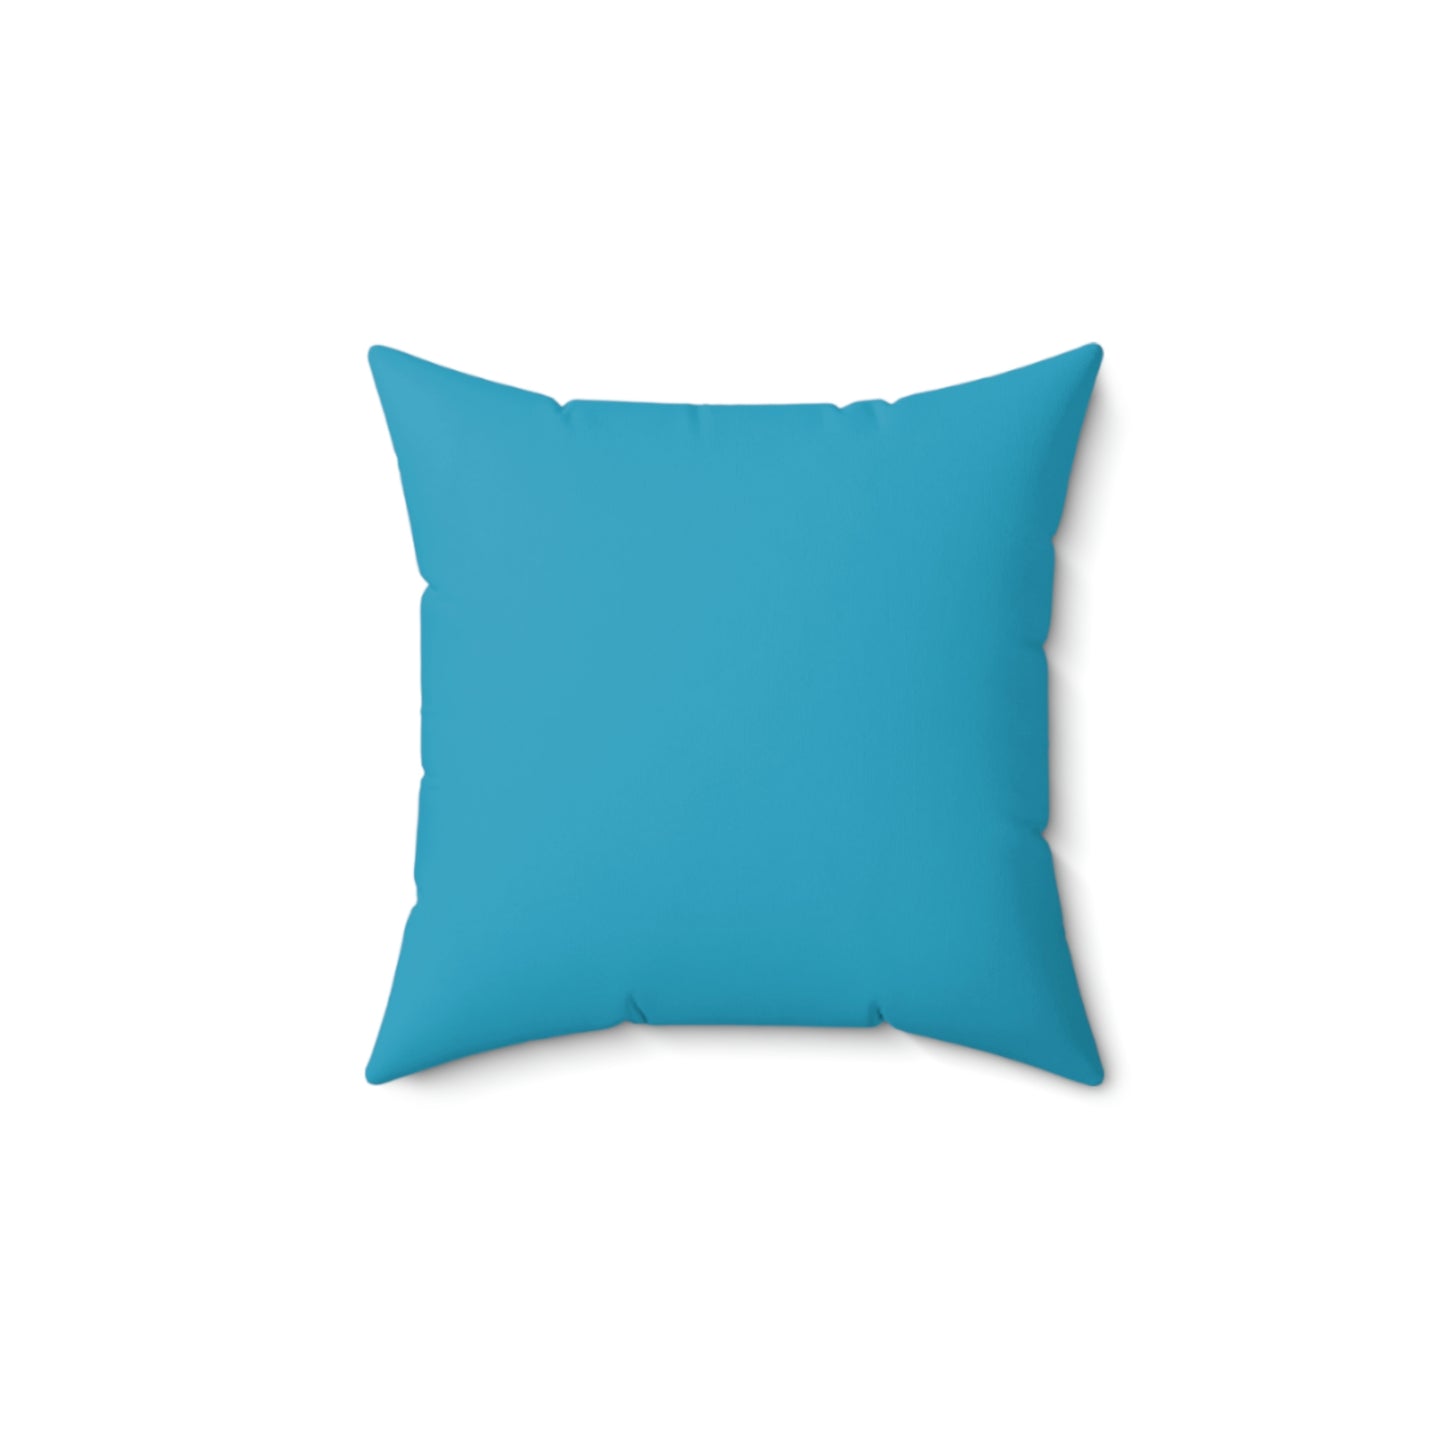 Spun Polyester Square Pillow Case "Mom Wow on Turquoise”